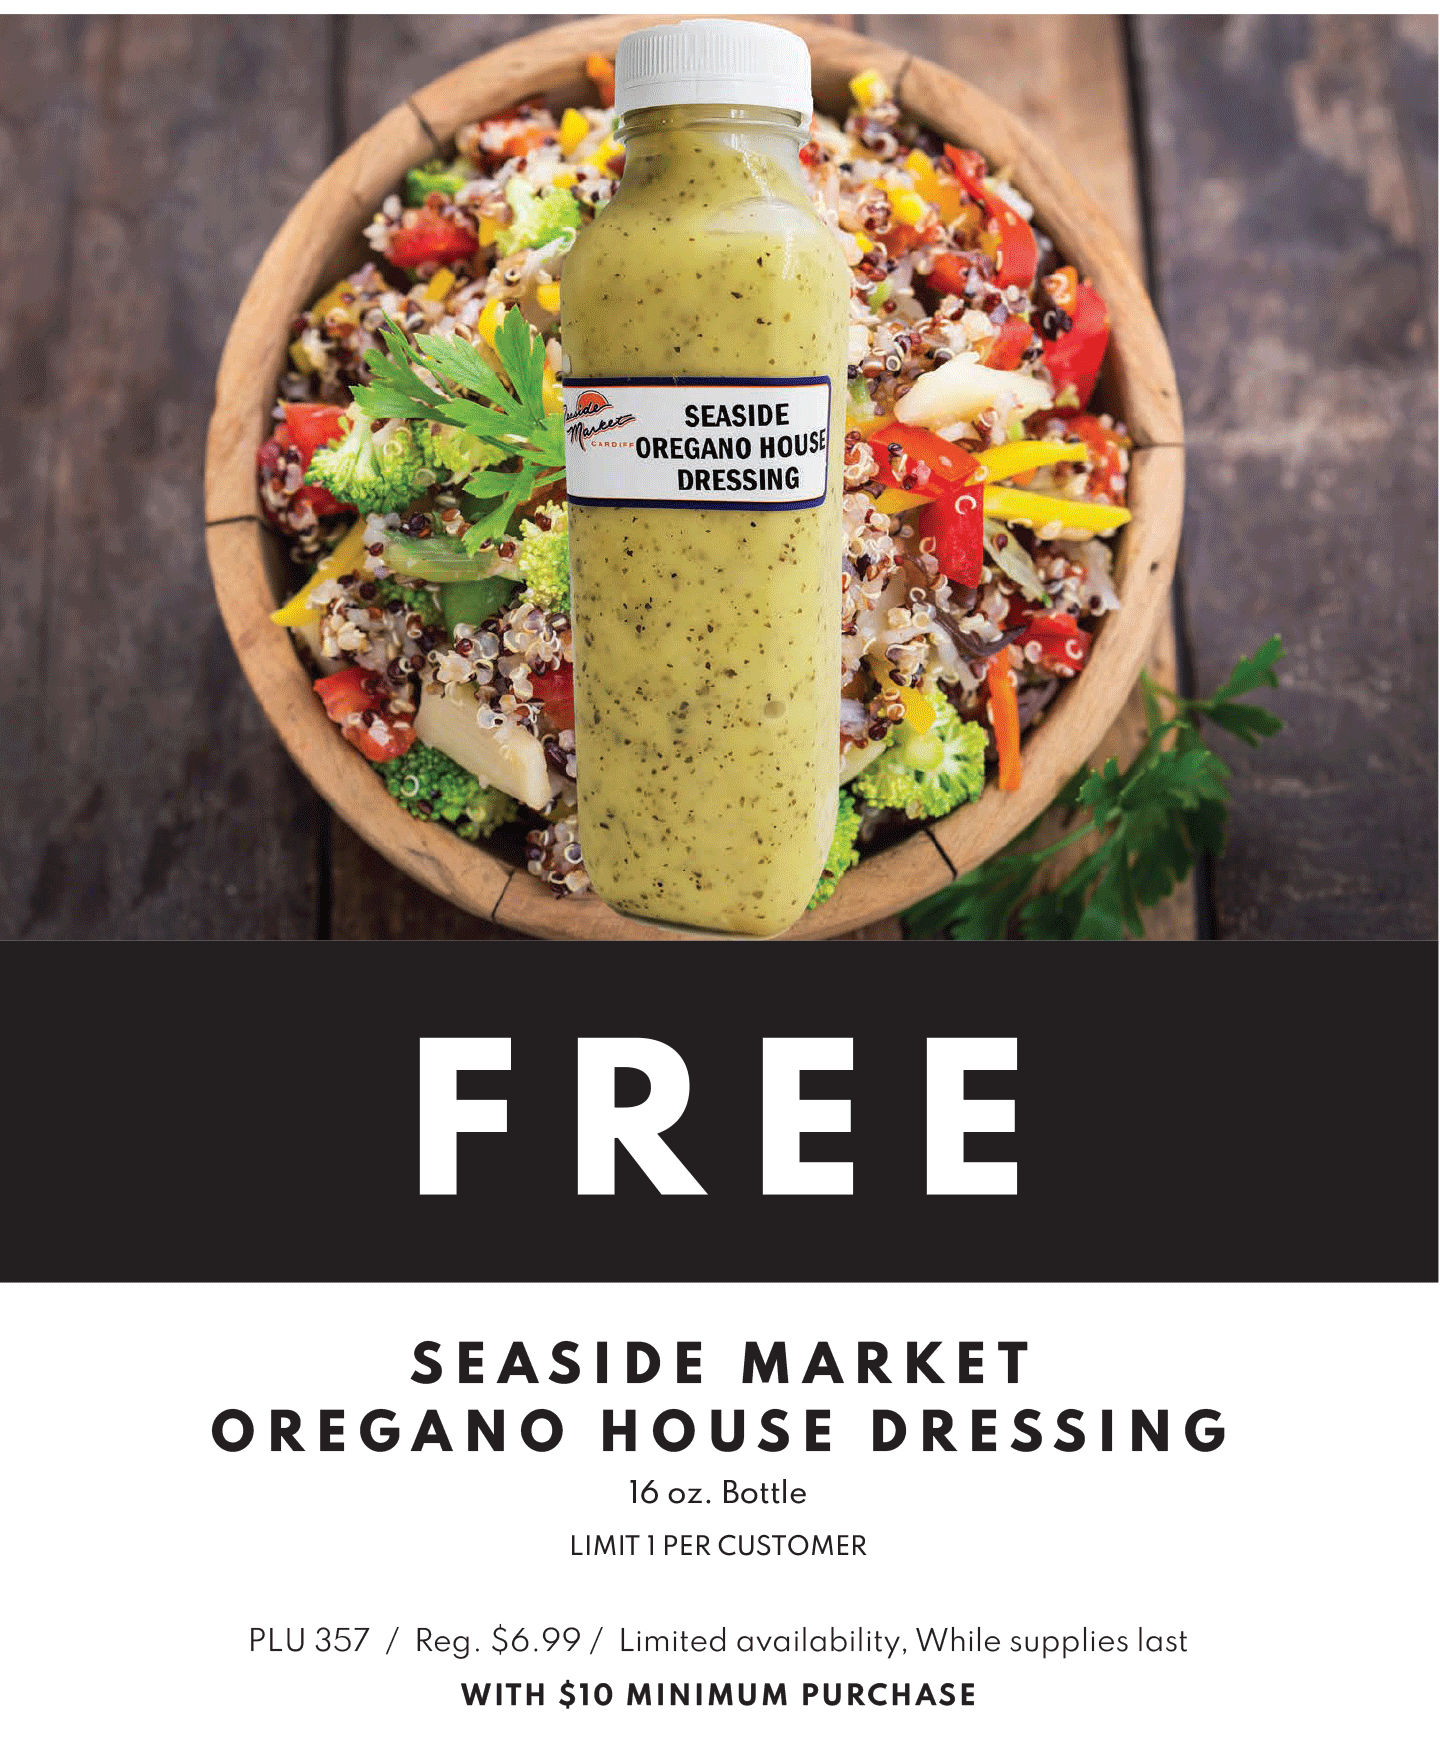 FREE Seaside Market Oregano House Dressing, 16 ounce bottle, limit 1 per customer, limited availability, while supplies last, with $10 minimum purchase